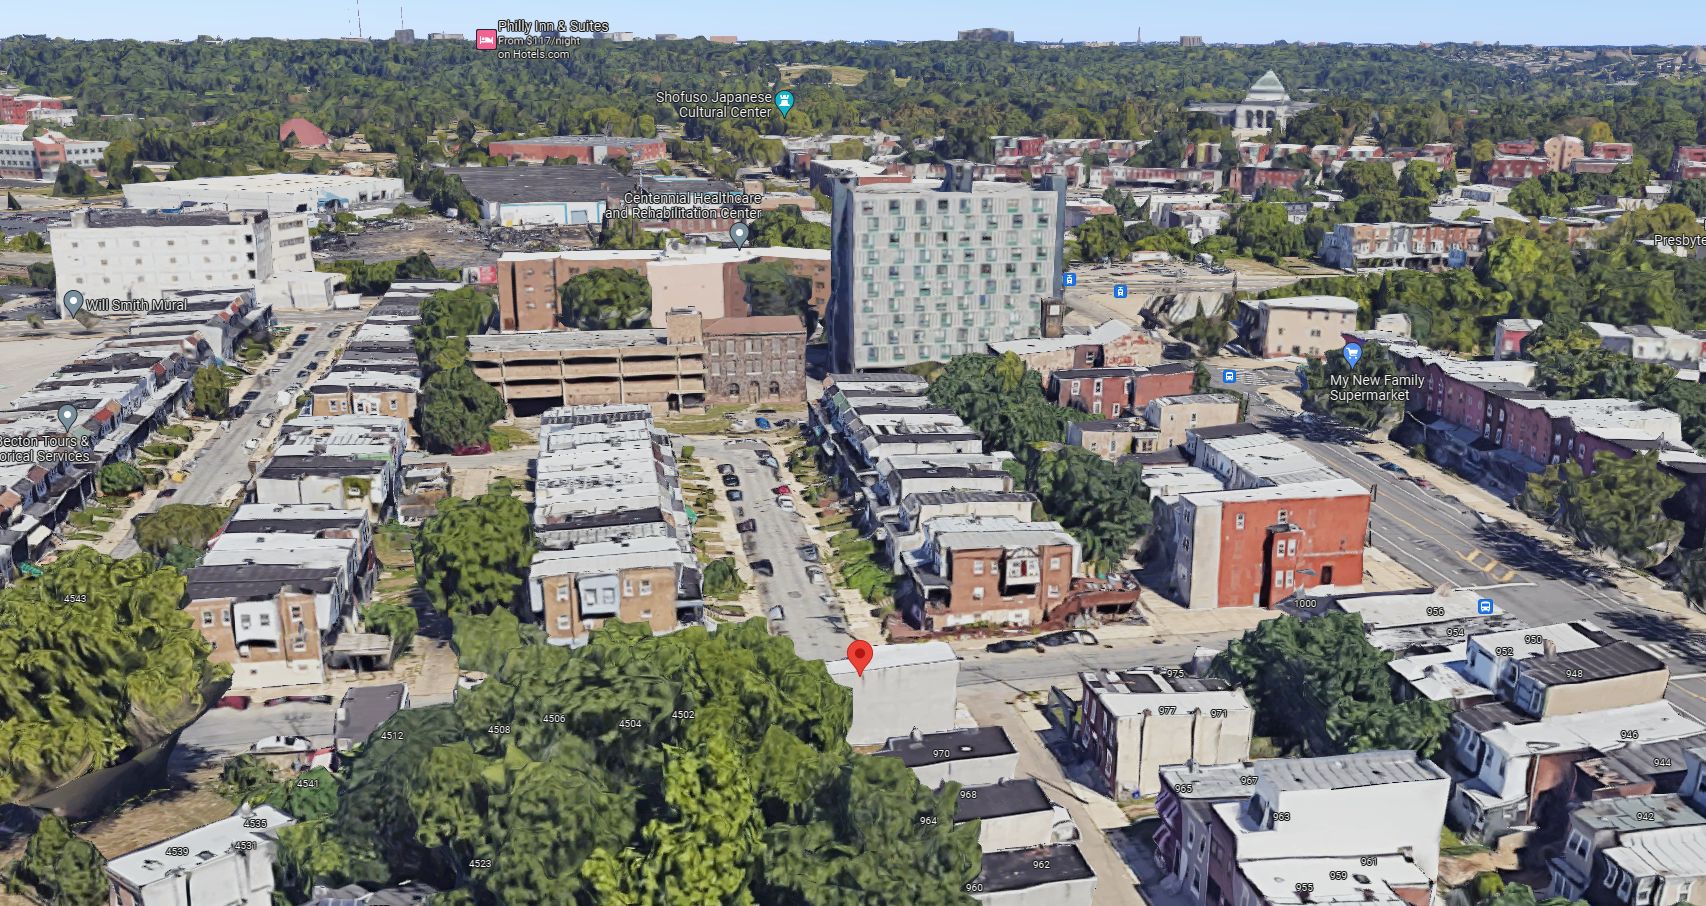 976 North 45th Street. Aerial view prior to redevelopment. Looking north. Credit: Google Maps